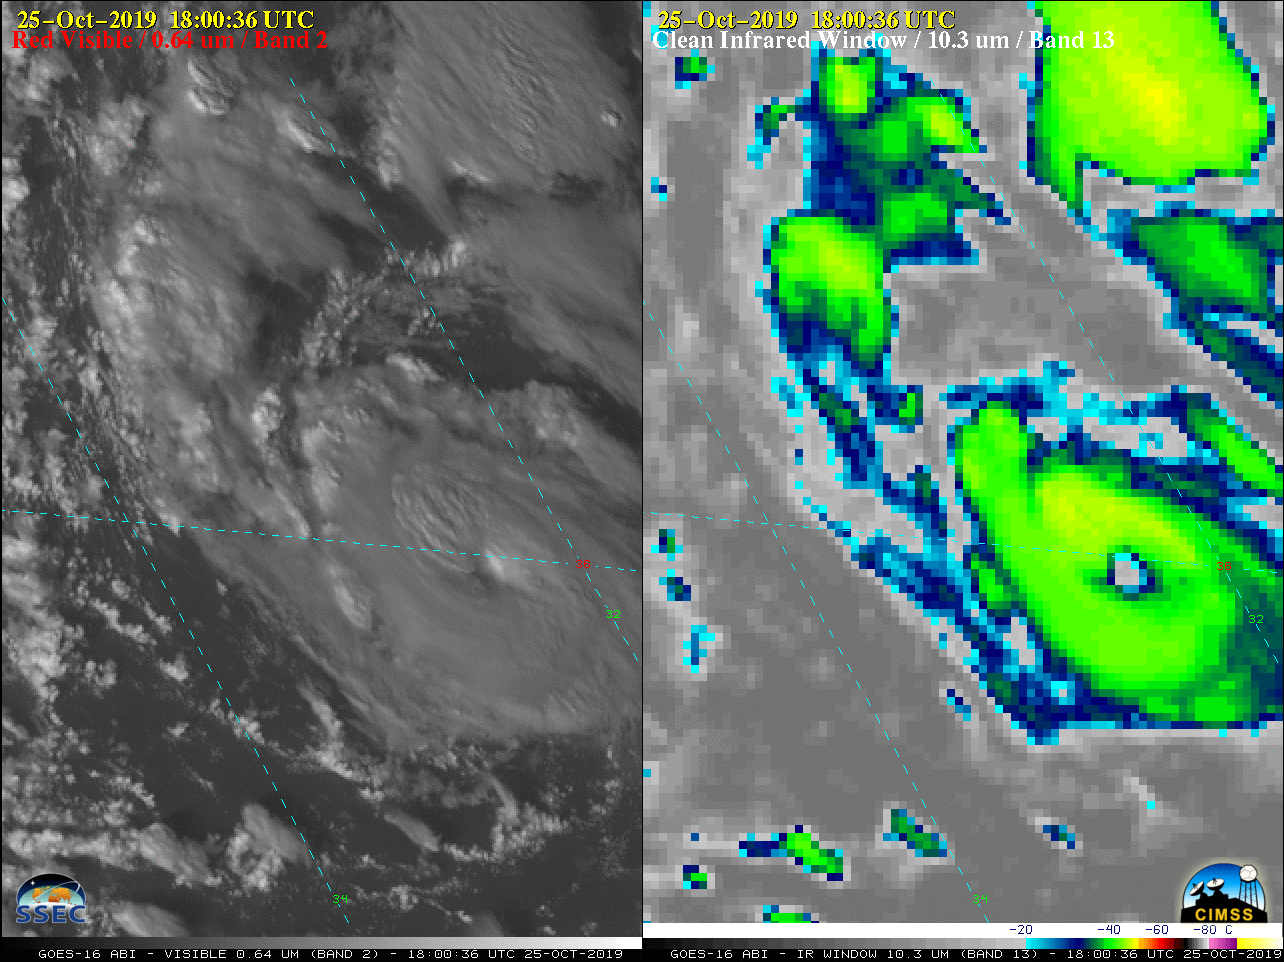 GOES-16 “Red” Visible (0.64 µm, left) and “Clean” Infrared Window (10.3 µm, right) images [click to play animation | MP4]